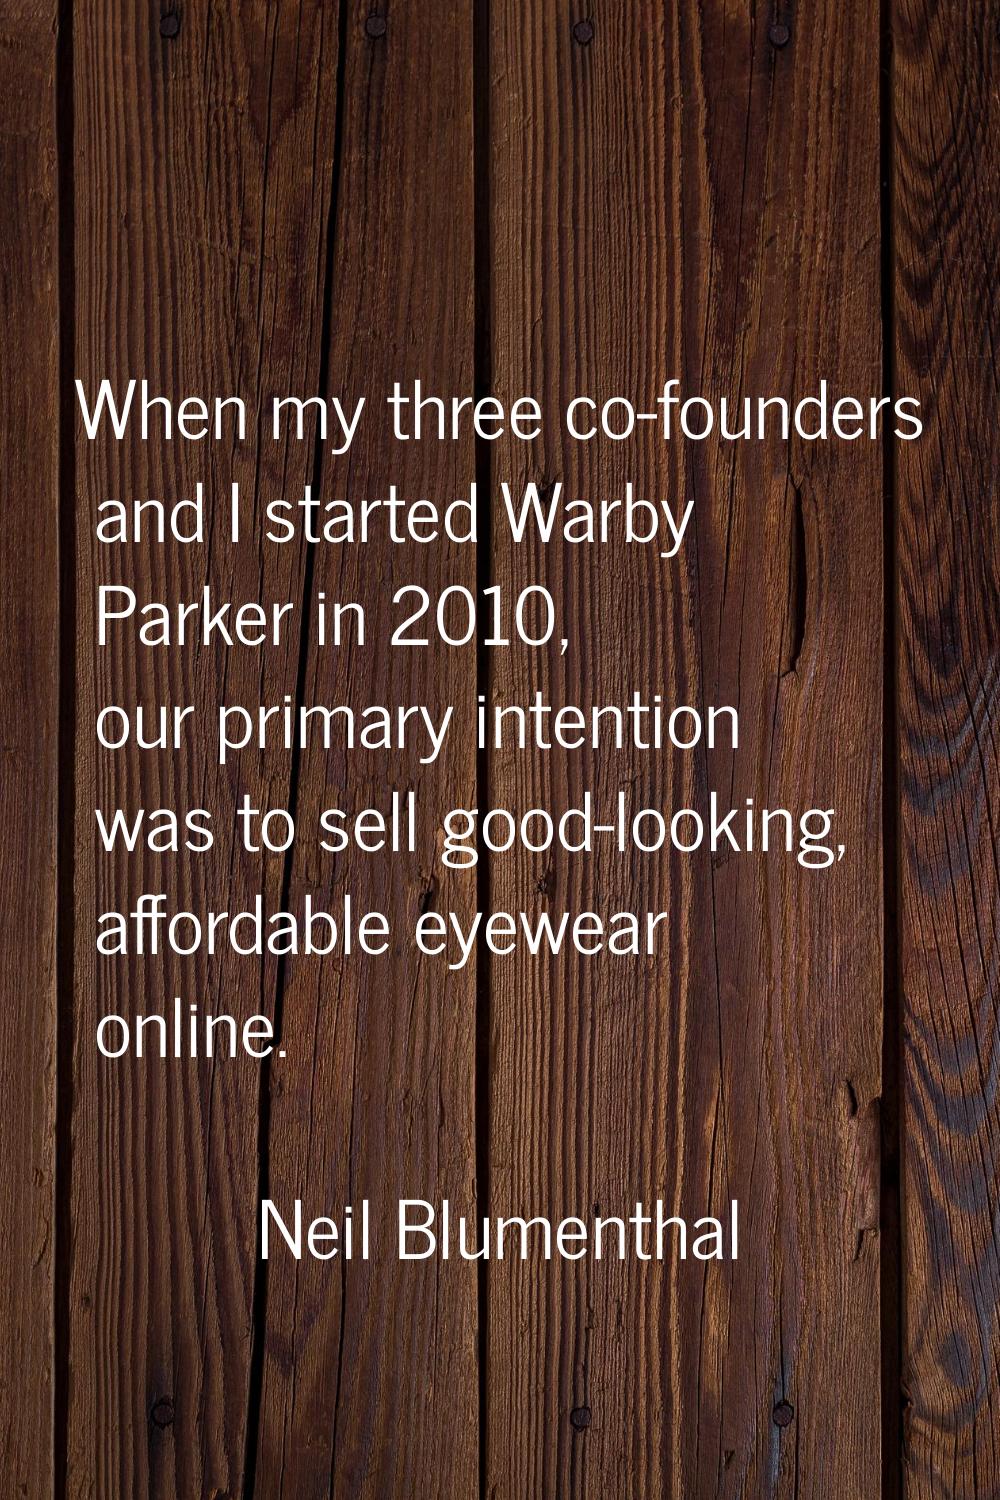 When my three co-founders and I started Warby Parker in 2010, our primary intention was to sell goo